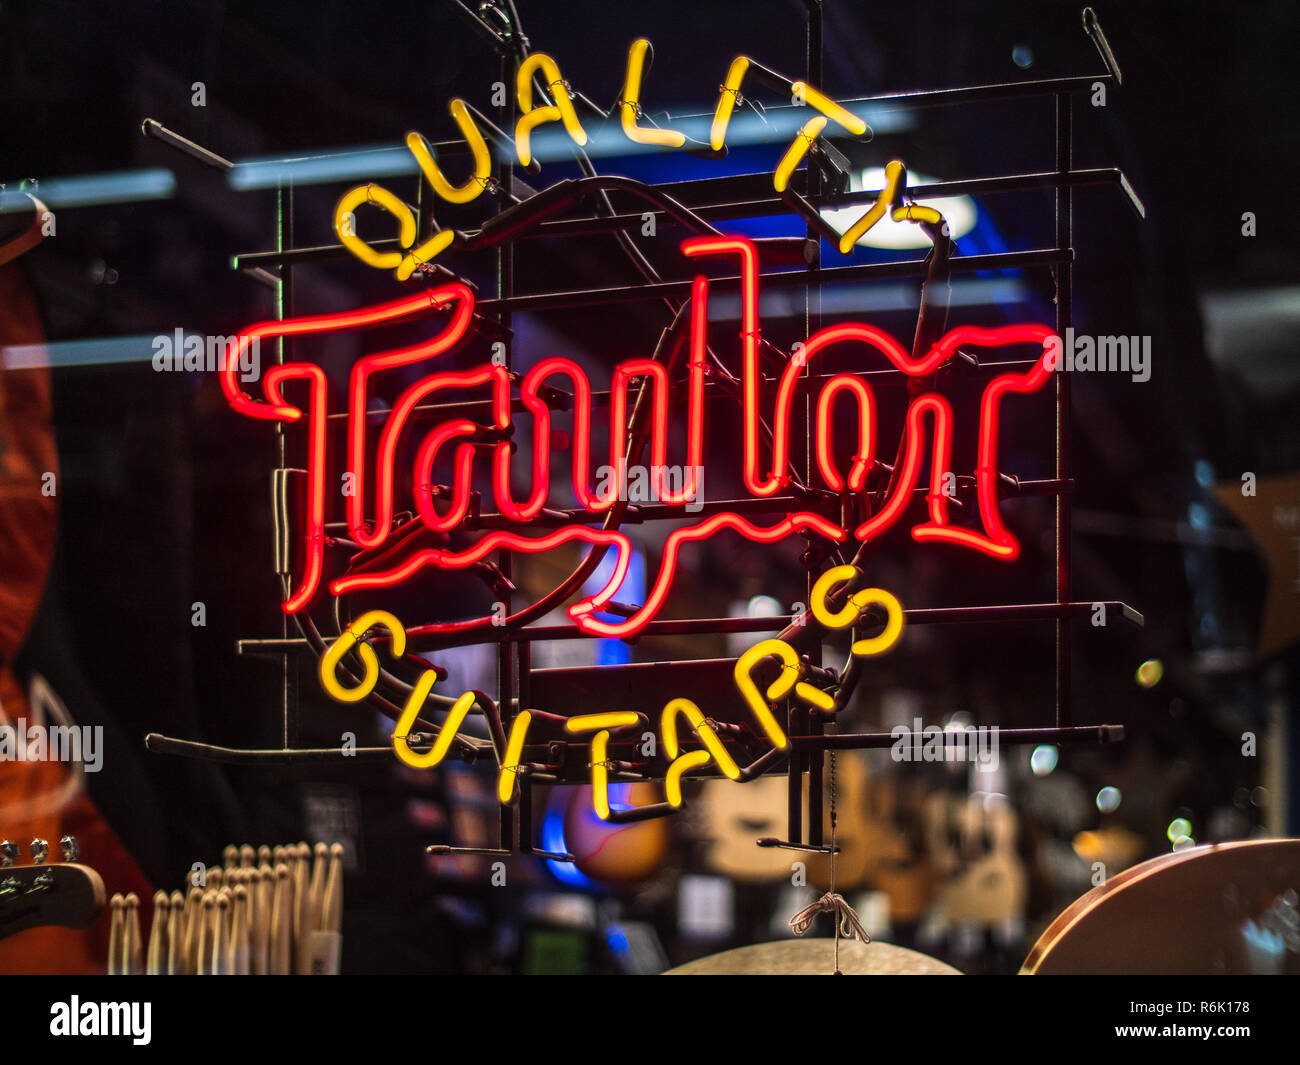 Taylor Quality Guitars neon sign in the window of a guitar store in Denmark Street in central London Stock Photo